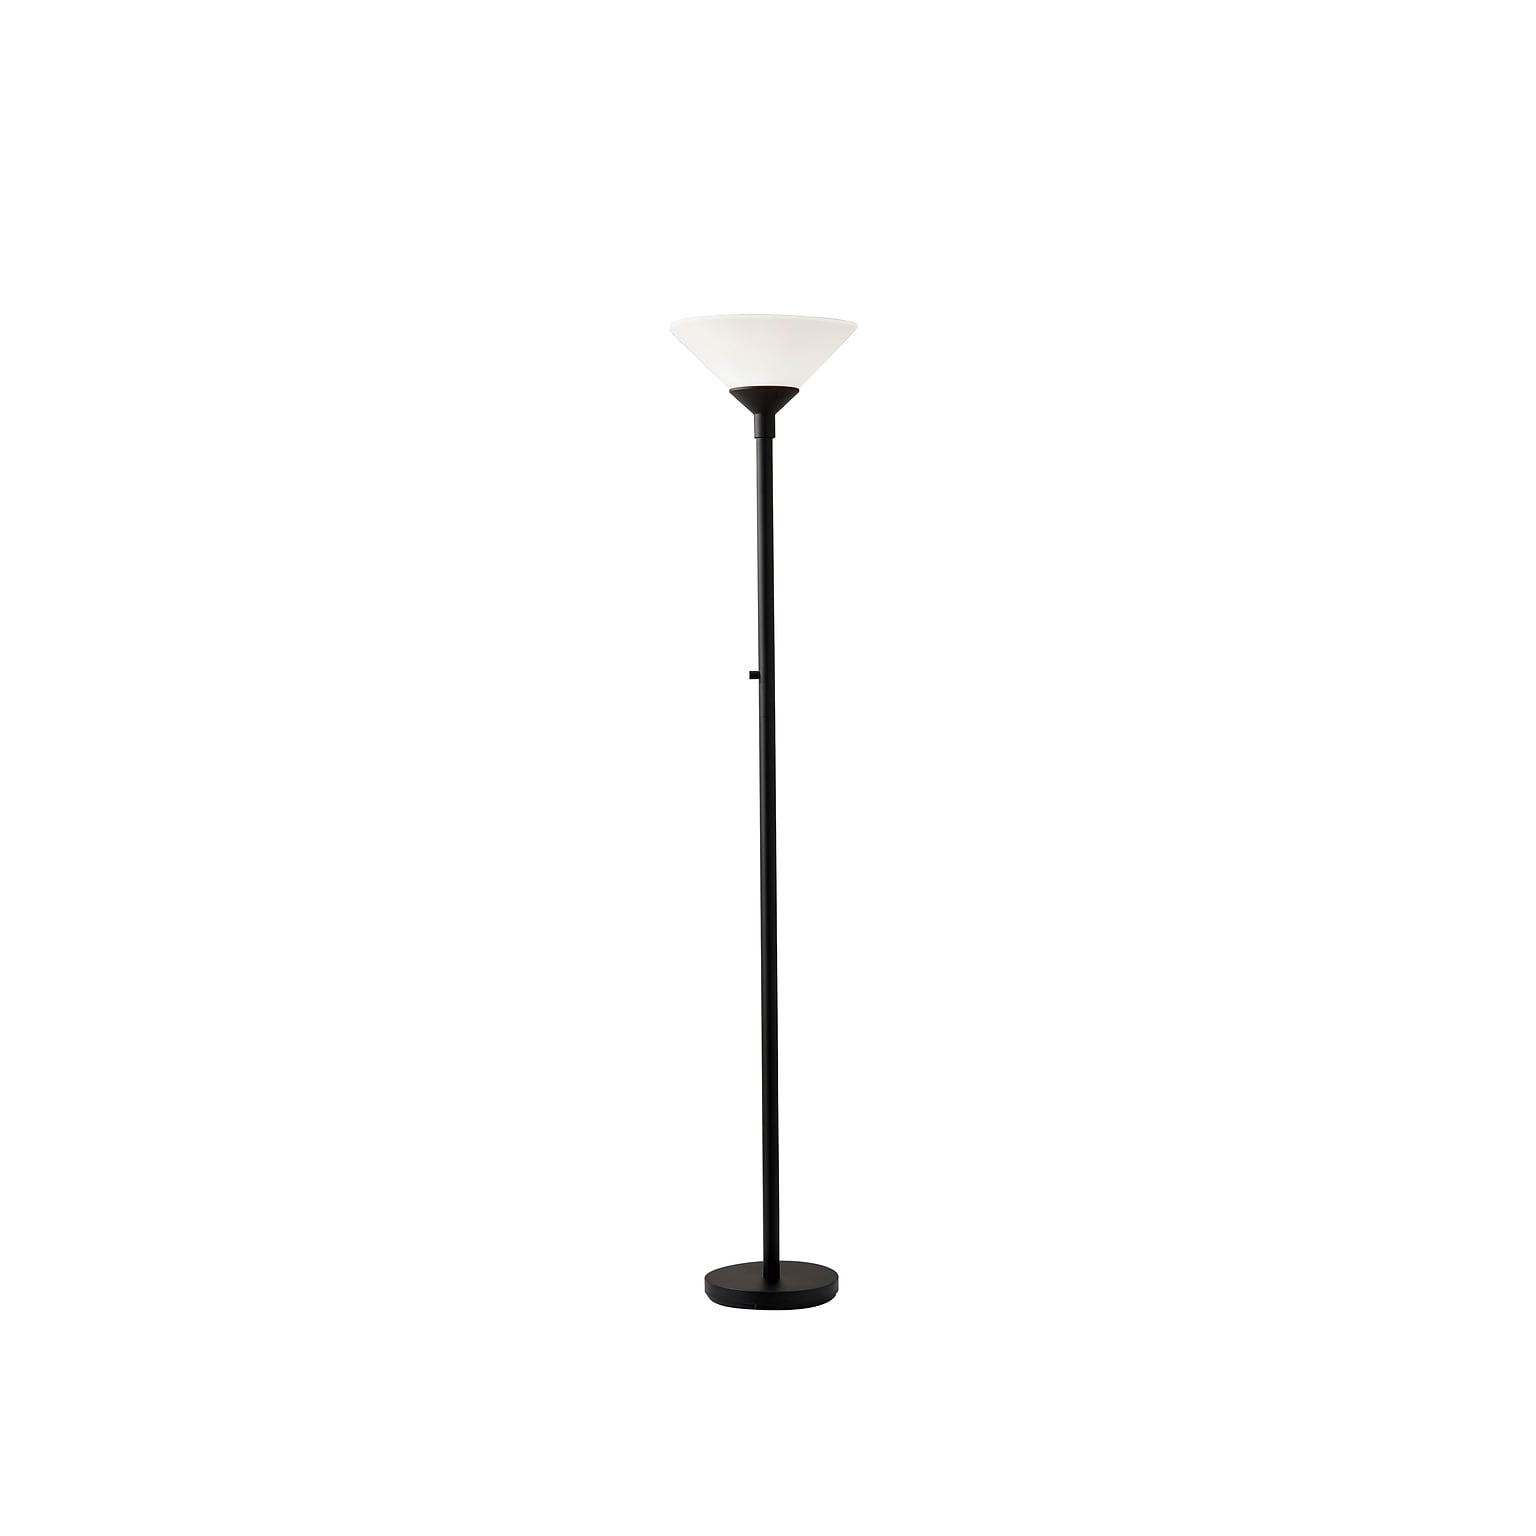 Adesso® Aries 73H 300 W Torchiere, Black with White Acrylic Cone Shade (7500-01)